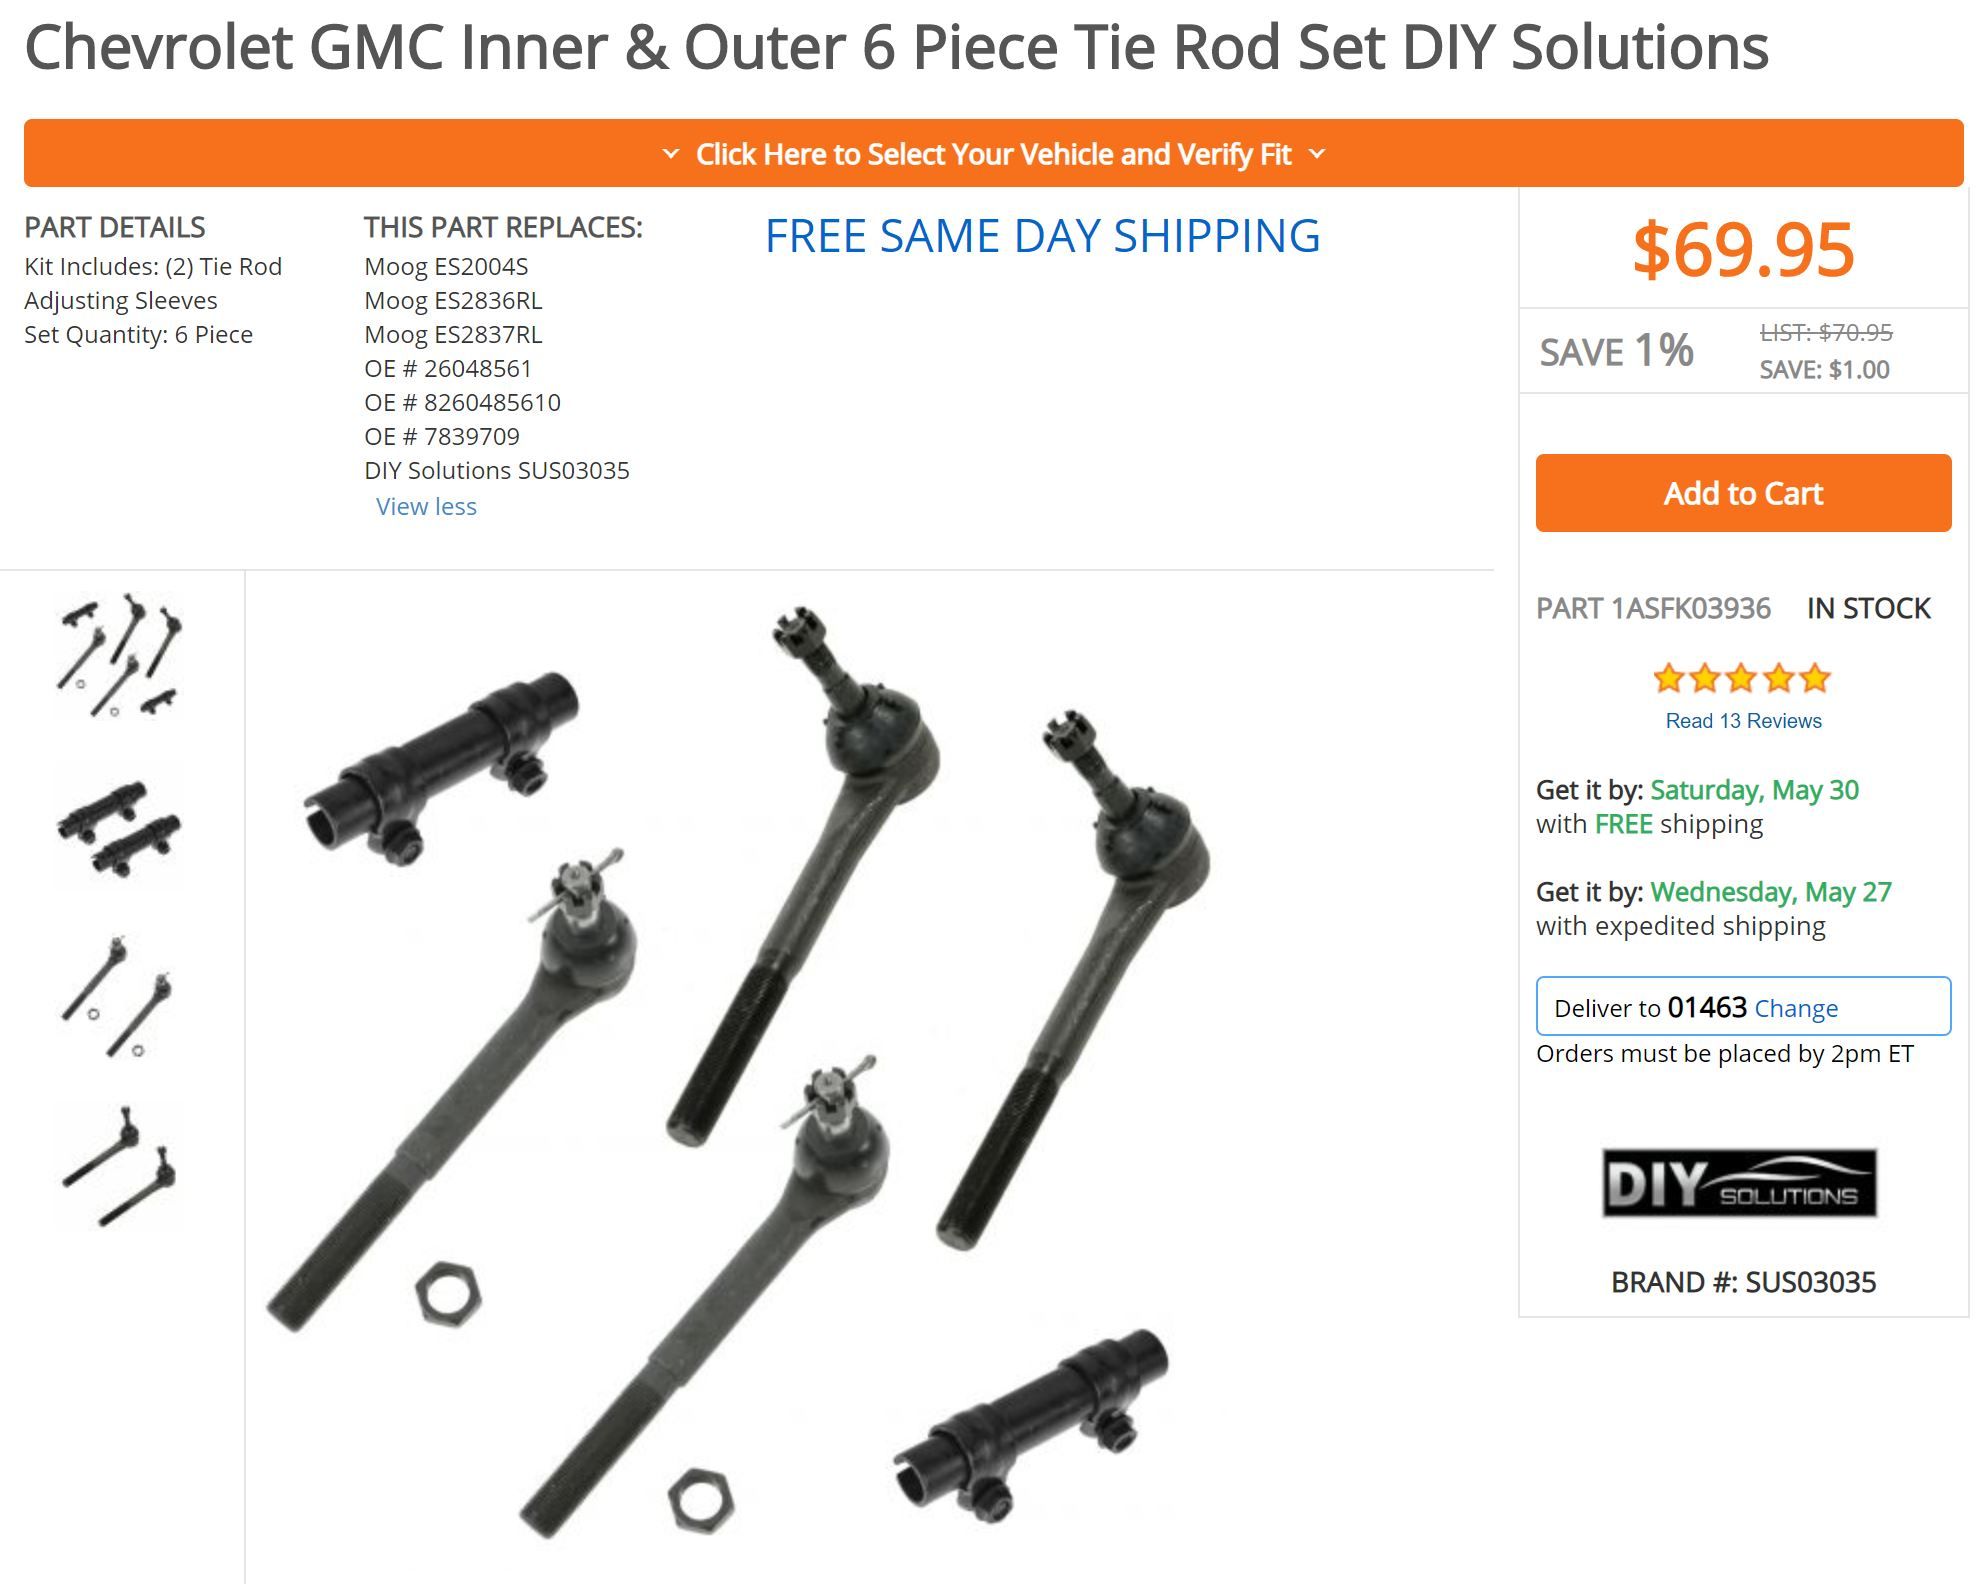 GMC Inner & Outer 6 Piece Tie Rod Set (obo)